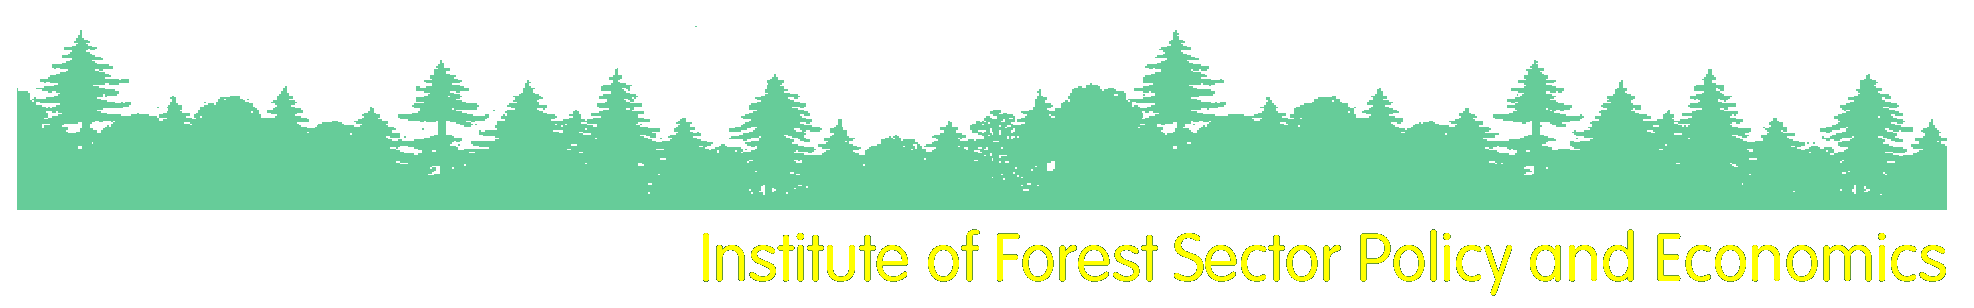 Institute of Forest Sector Policy and Economics